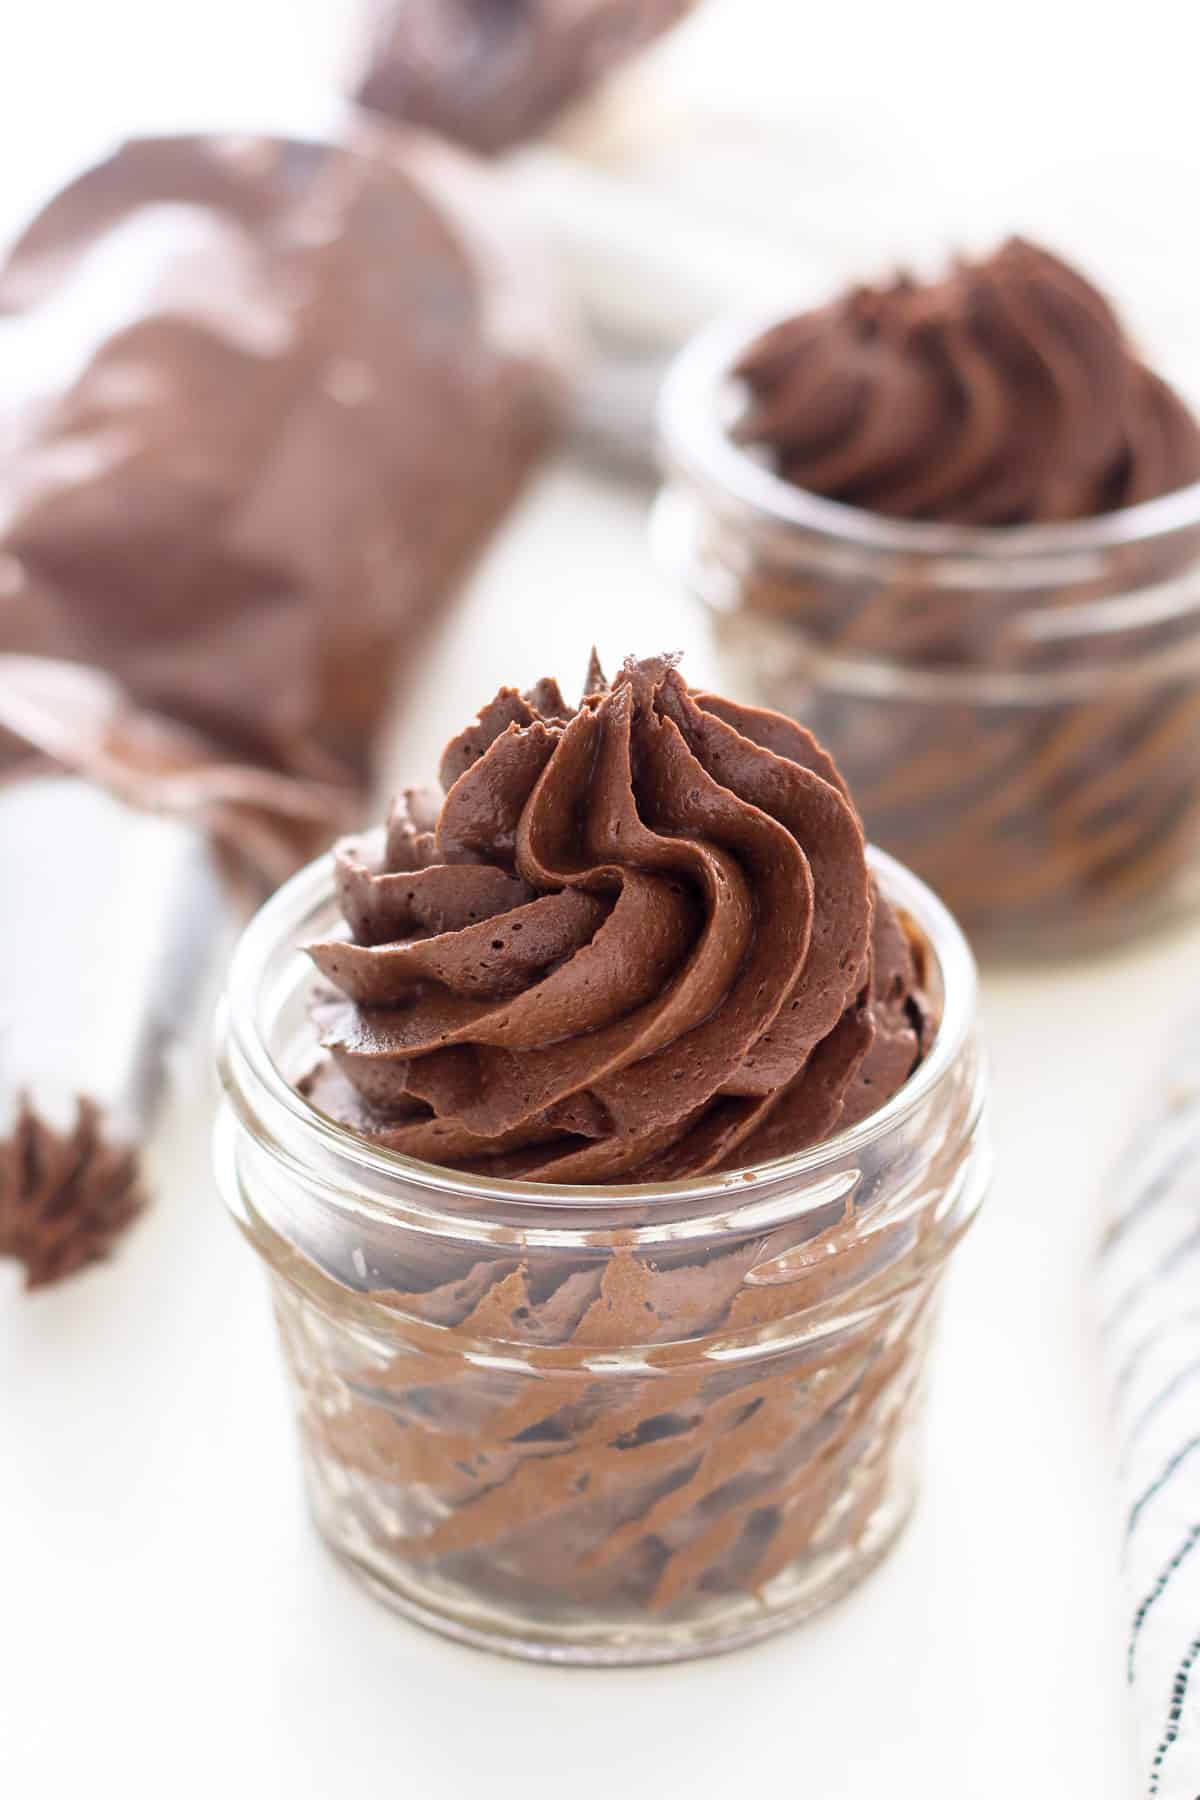 Chocolate fudge frosting swirled in a glass jar, with a second jar of frosting and a piping bag in the background.